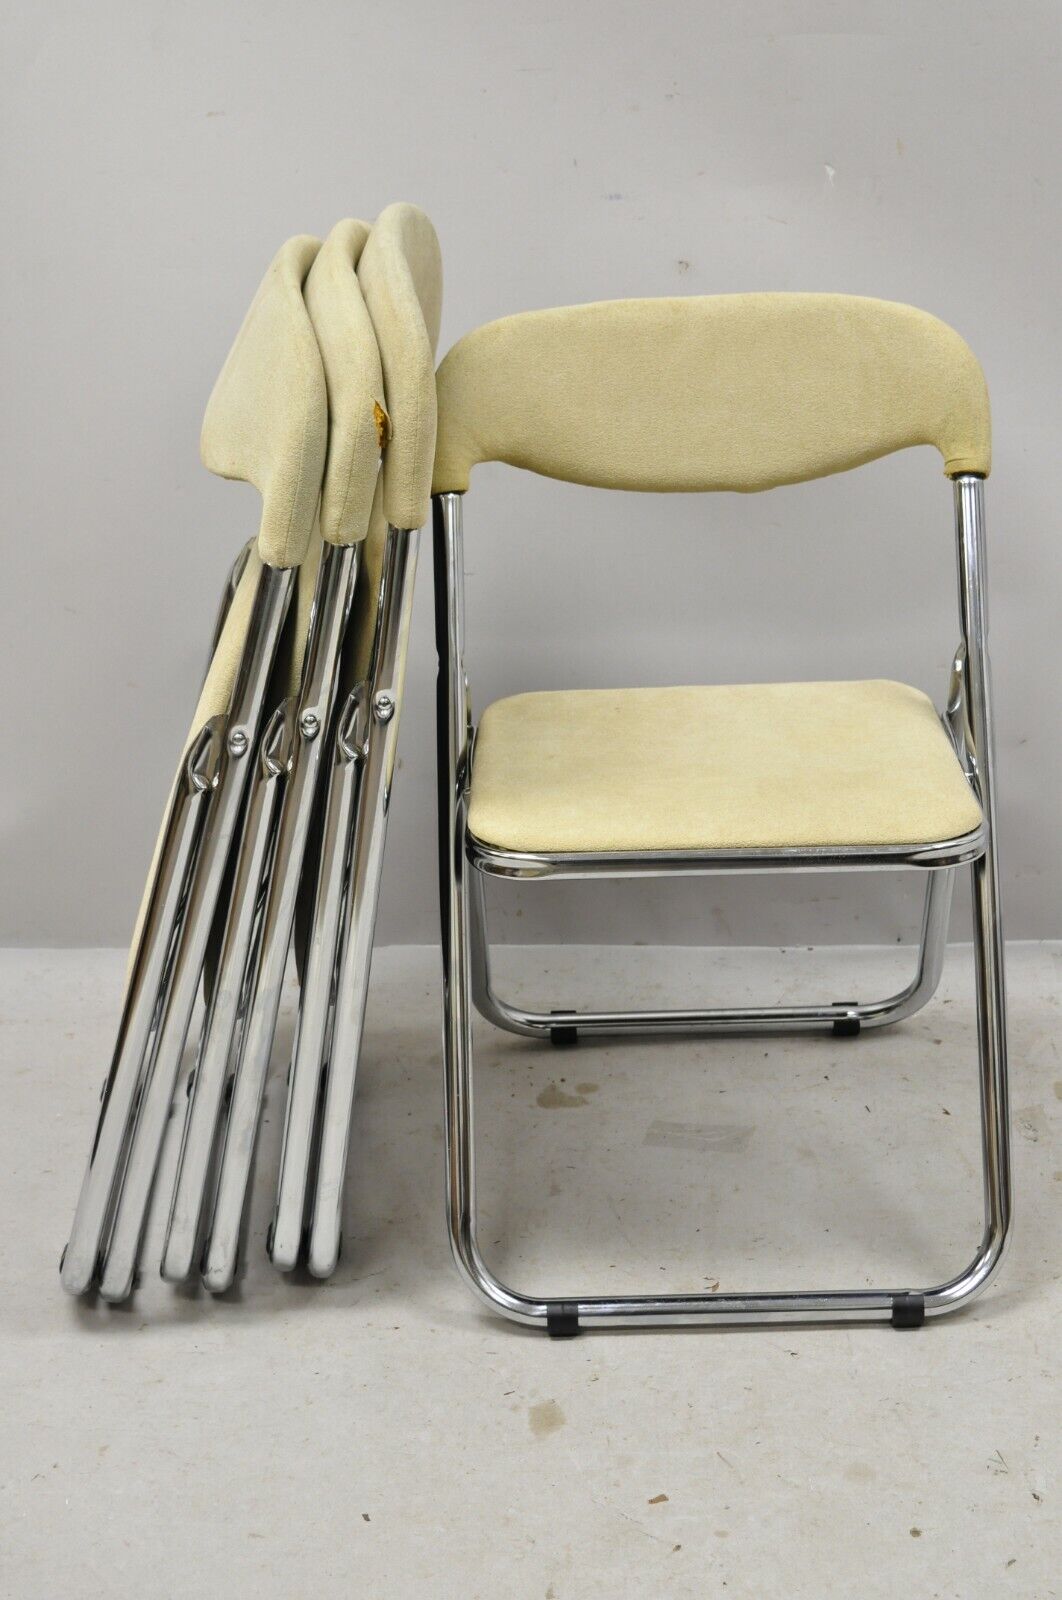 Vintage Italian Mid Century Chrome Upholstered Folding Game Chairs - Set of 4